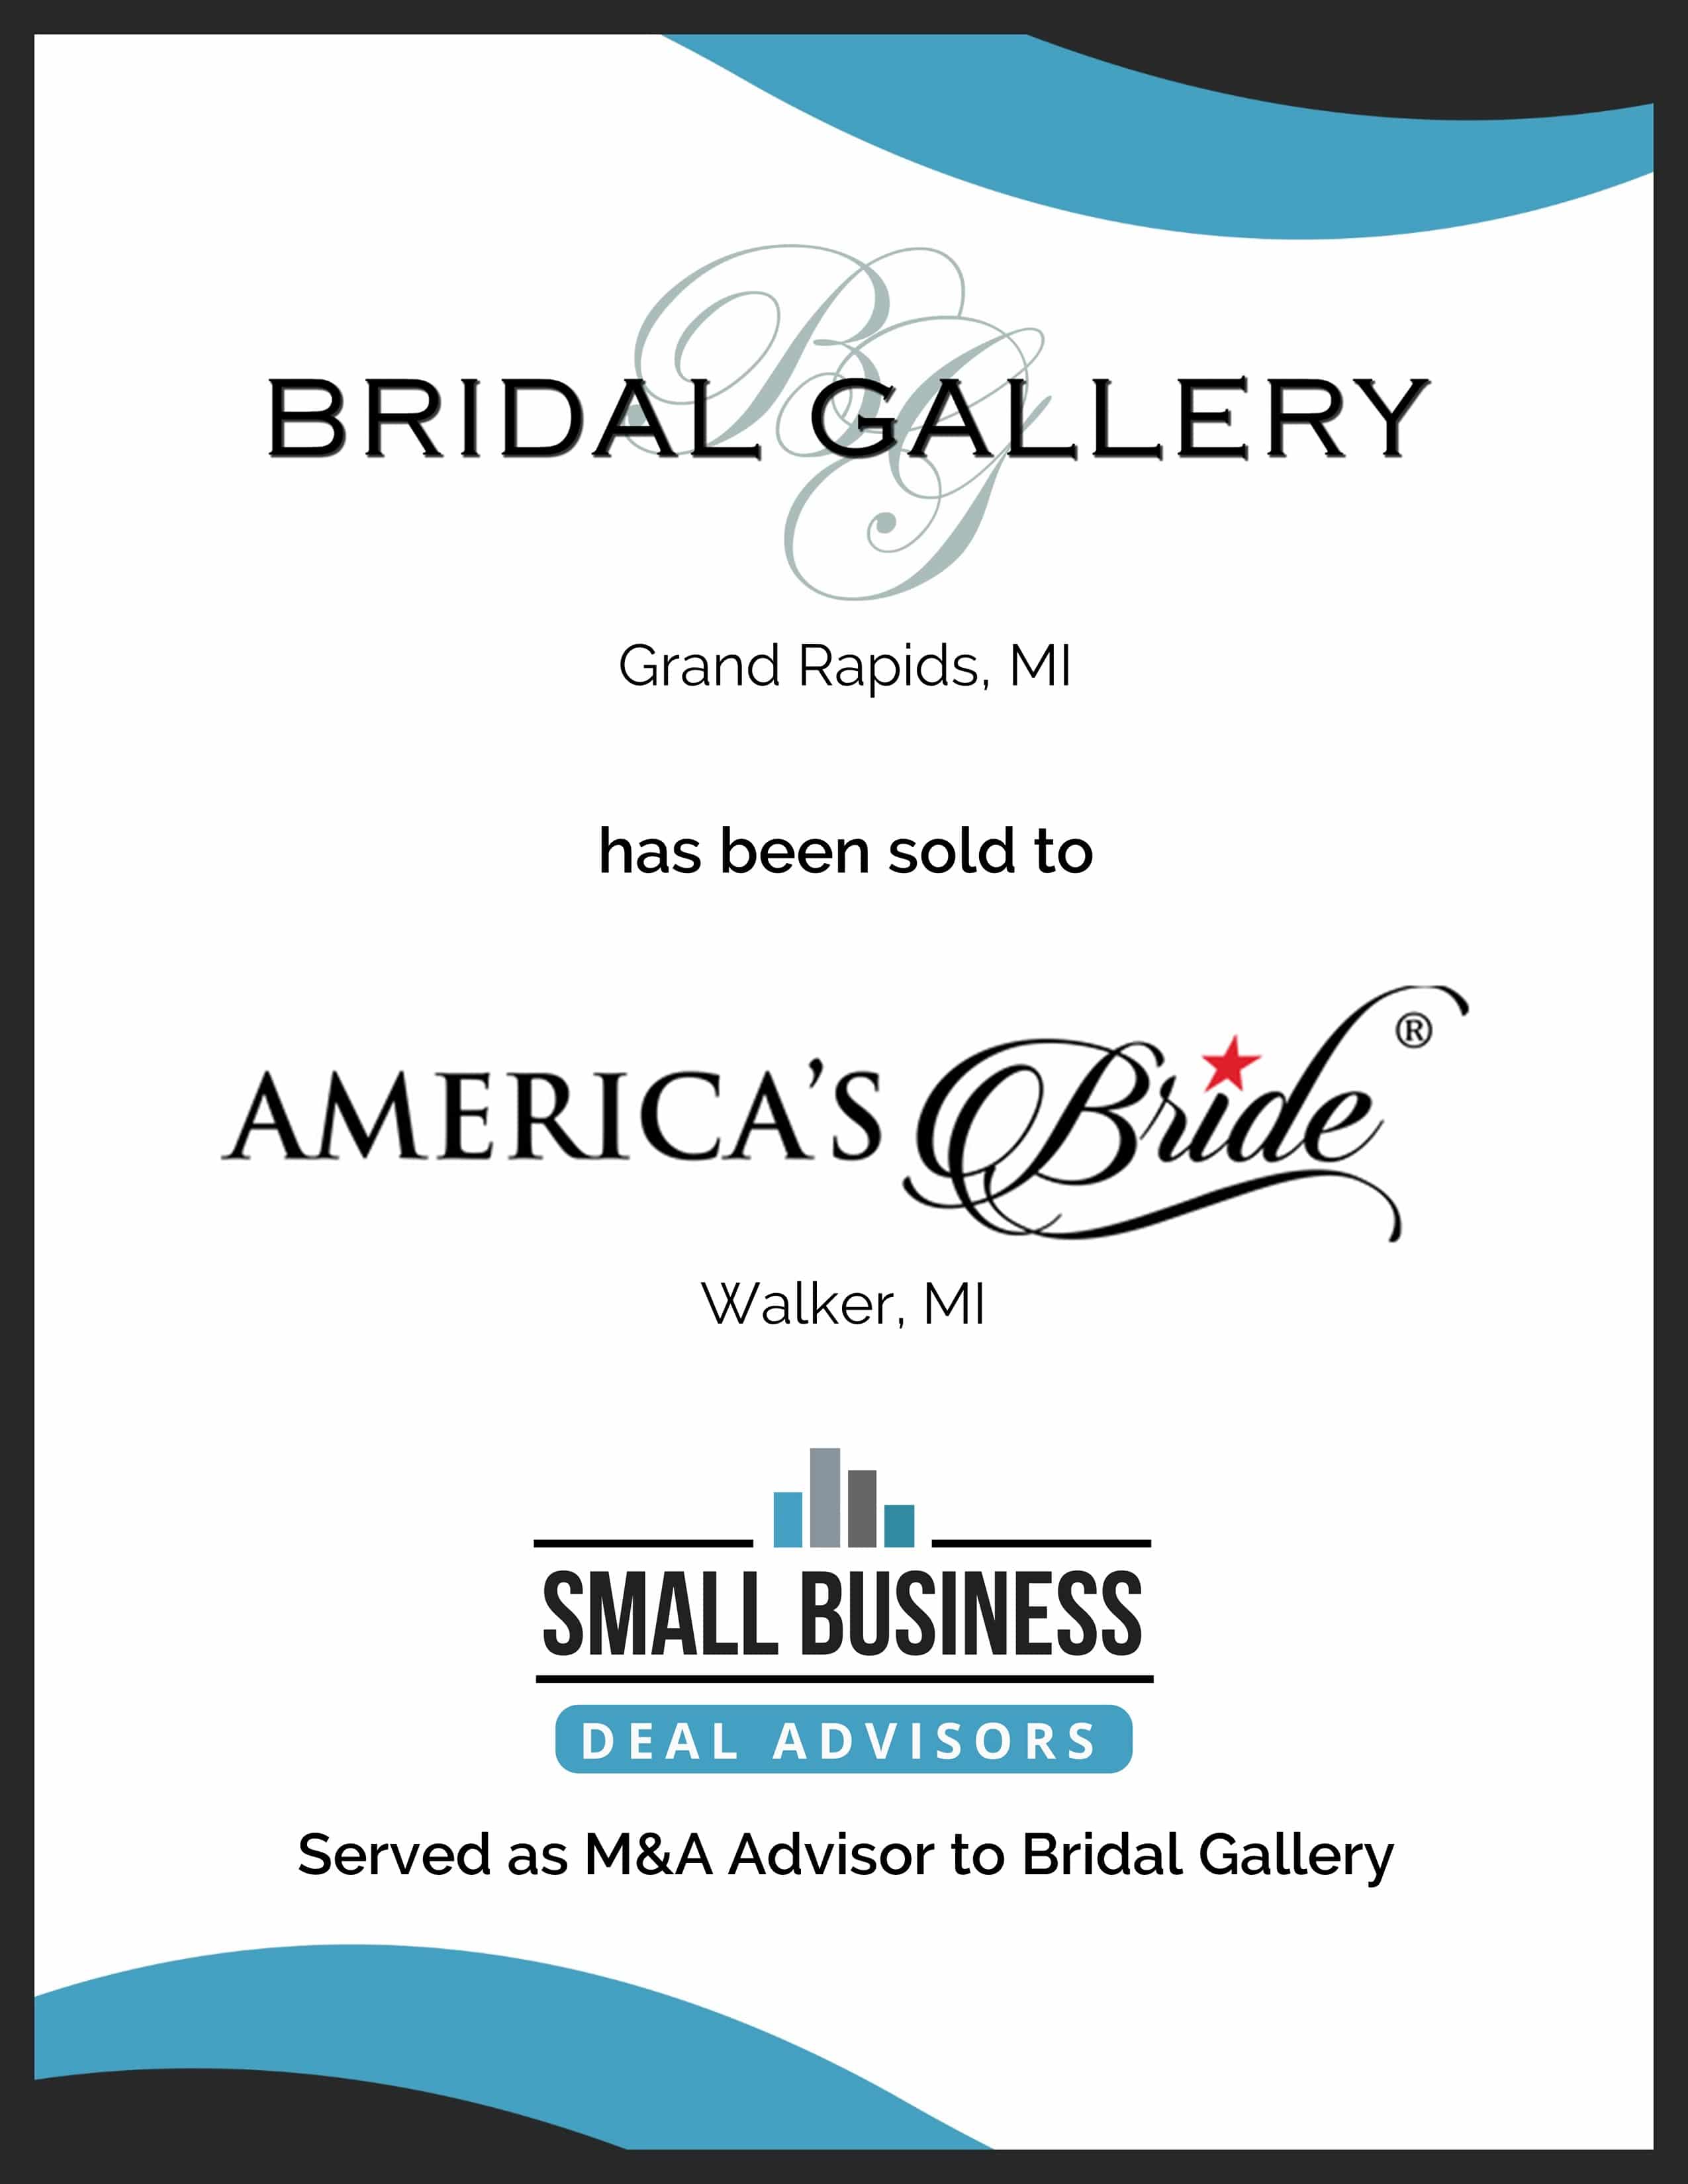 Bridal Gallery Acquired by America's Bride